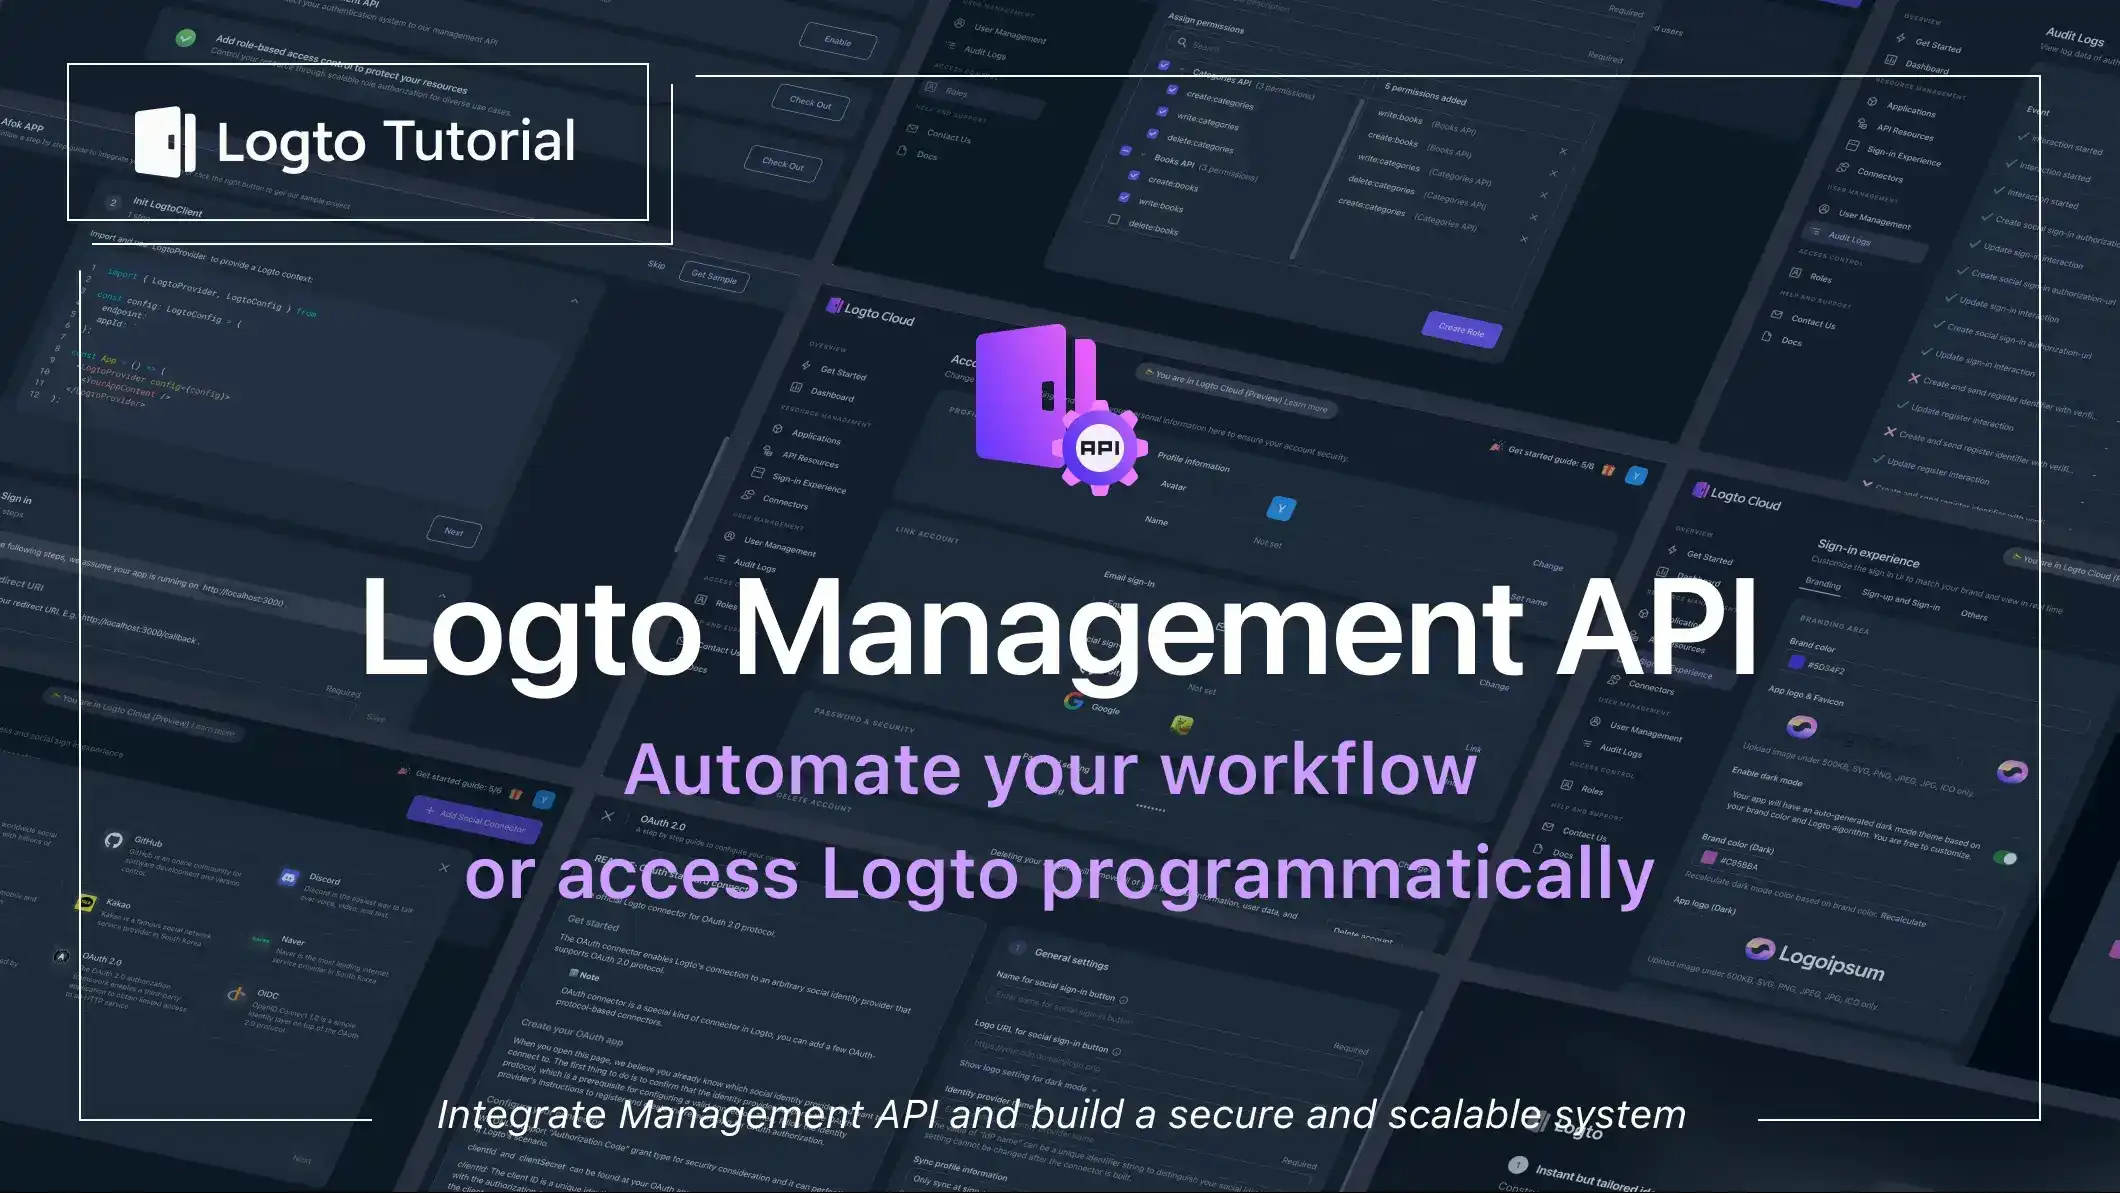 Use Logto Management API: A step-by-step guide